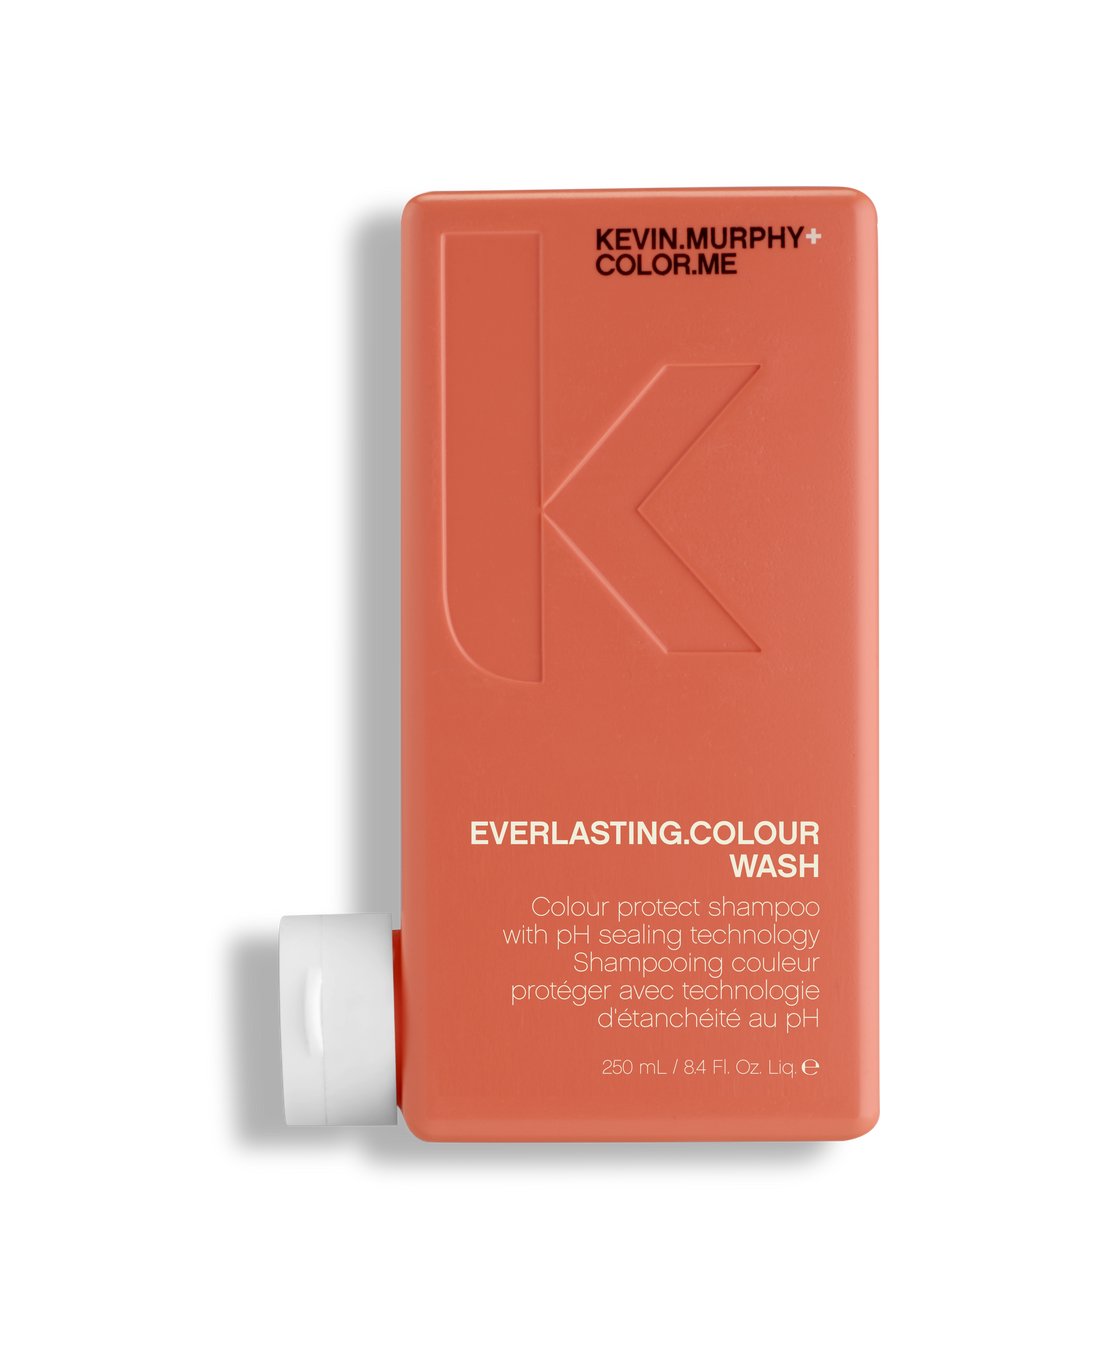 KEVIN MURPHY EVERLASTING COLOUR WASH 250ml